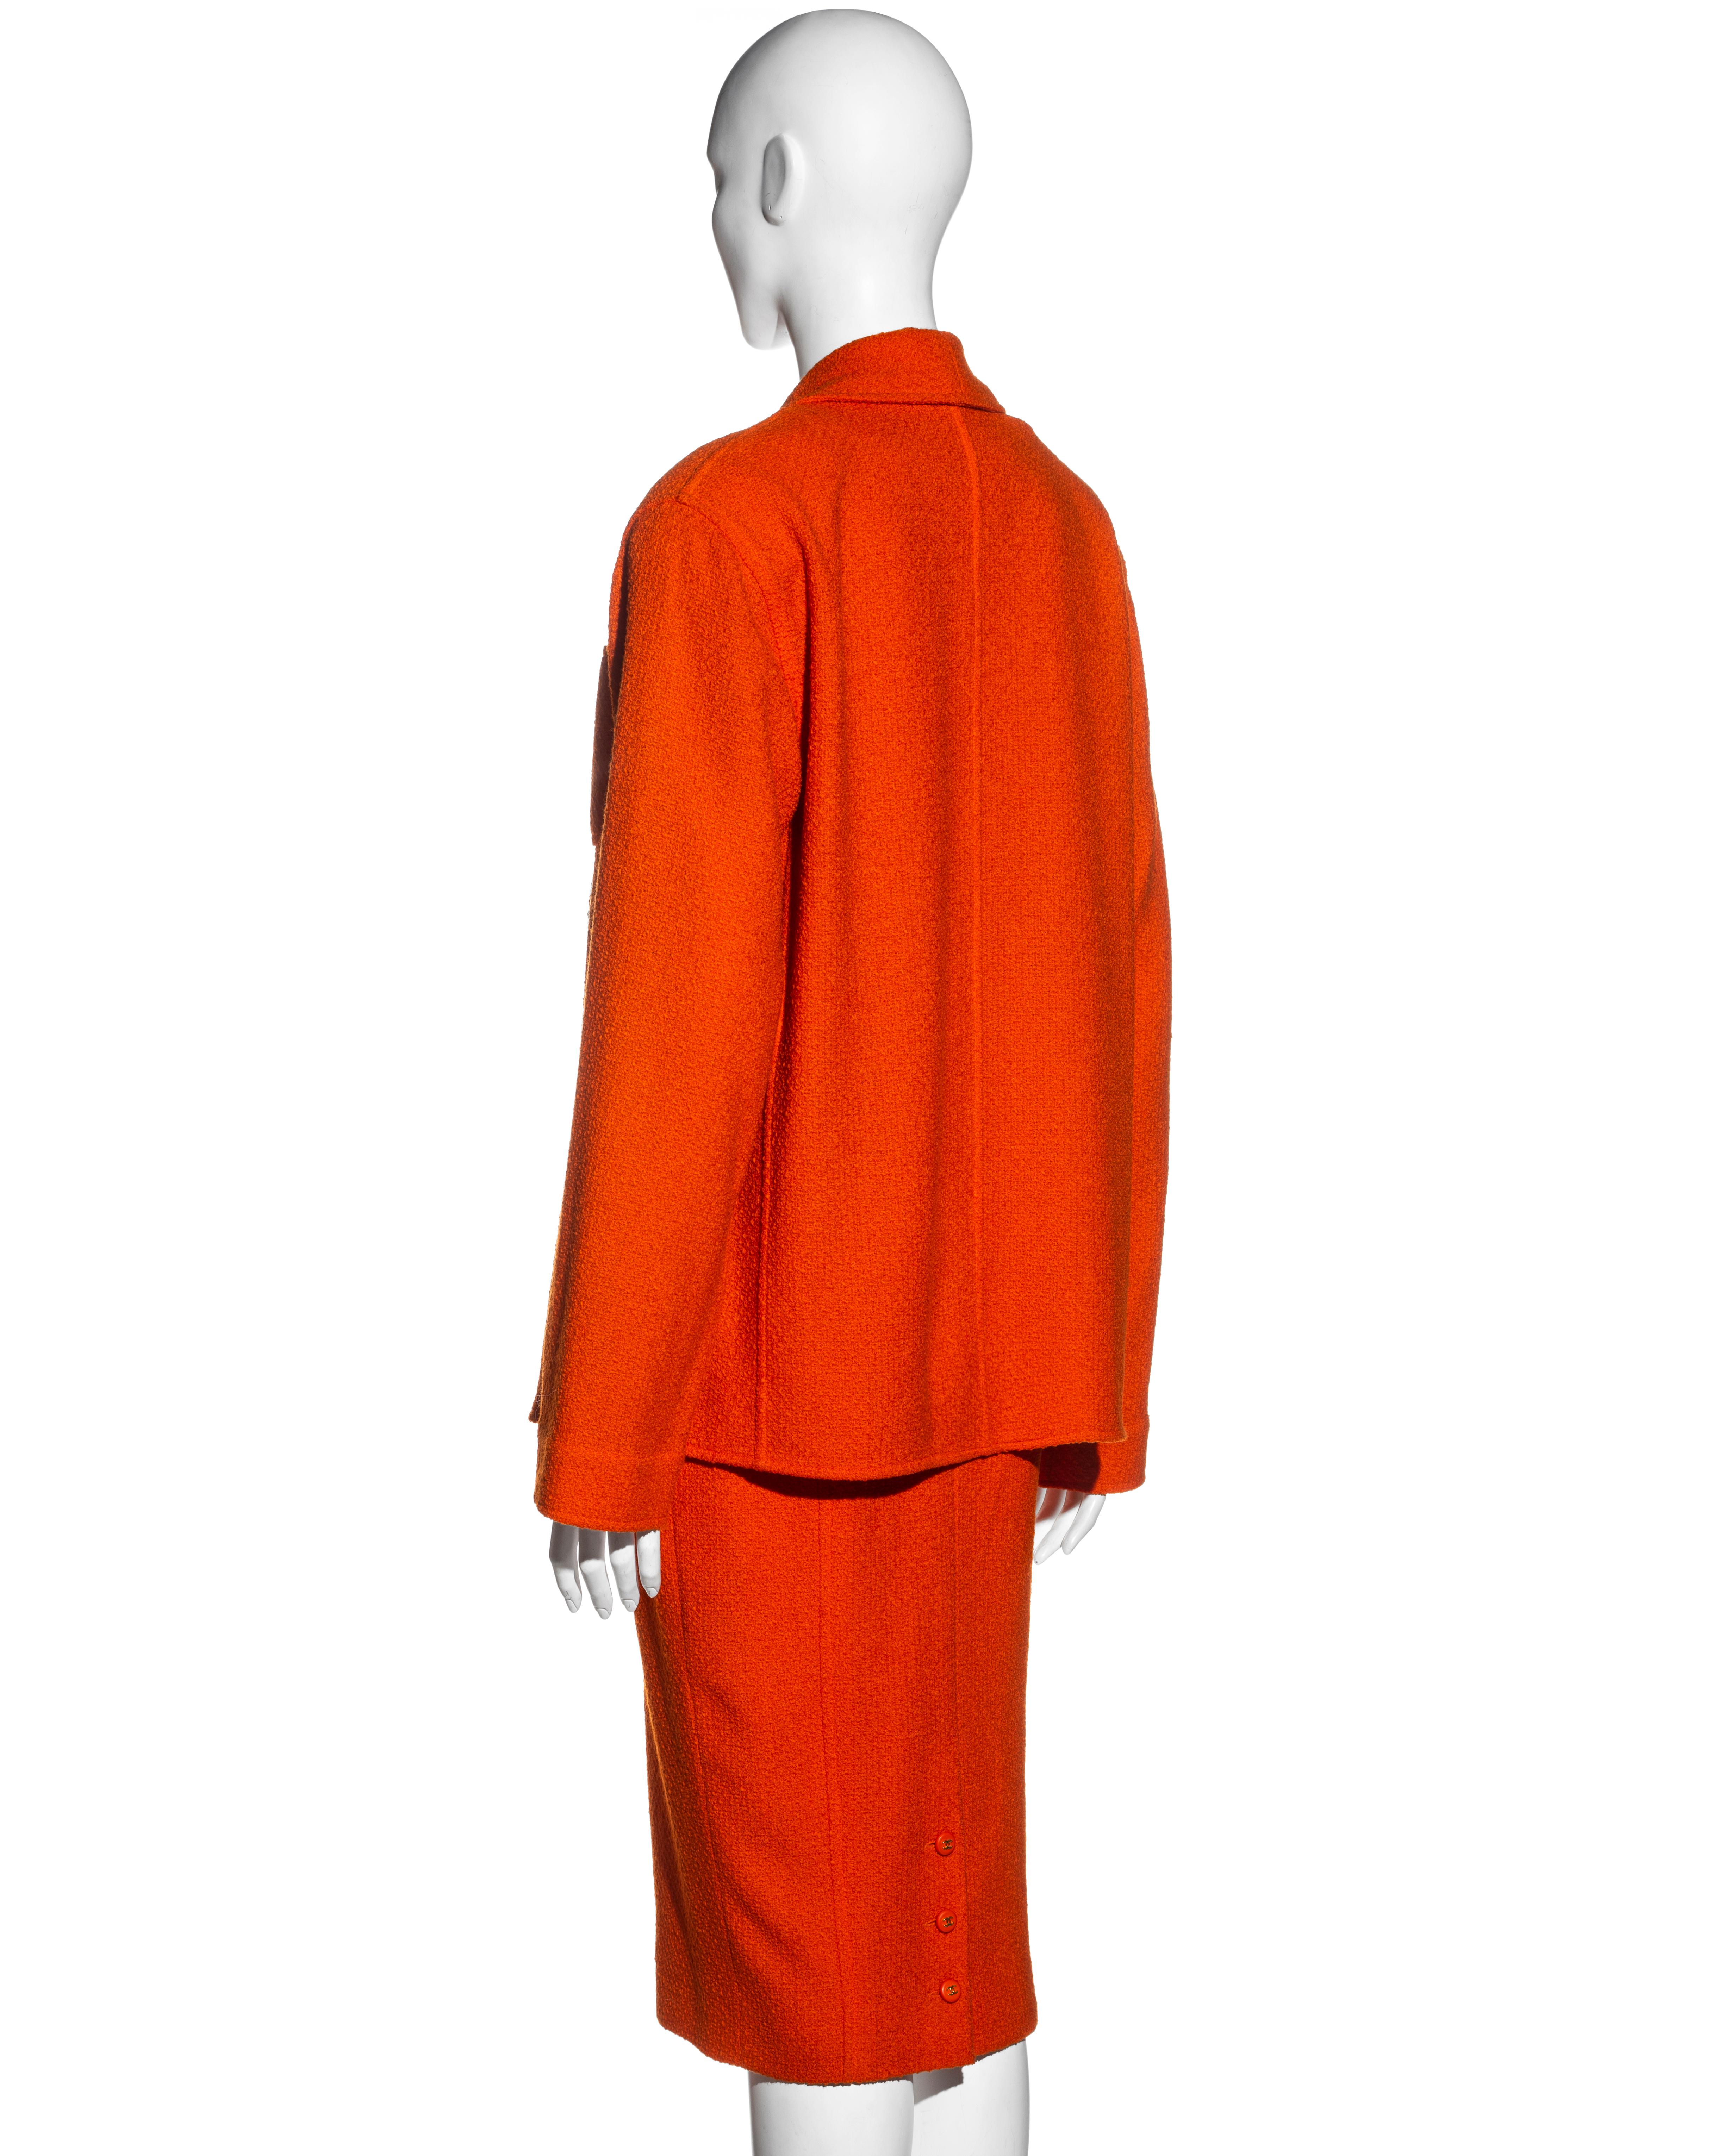 Chanel by Karl Lagerfeld orange bouclé wool dress and jacket set, fw 1995 For Sale 5